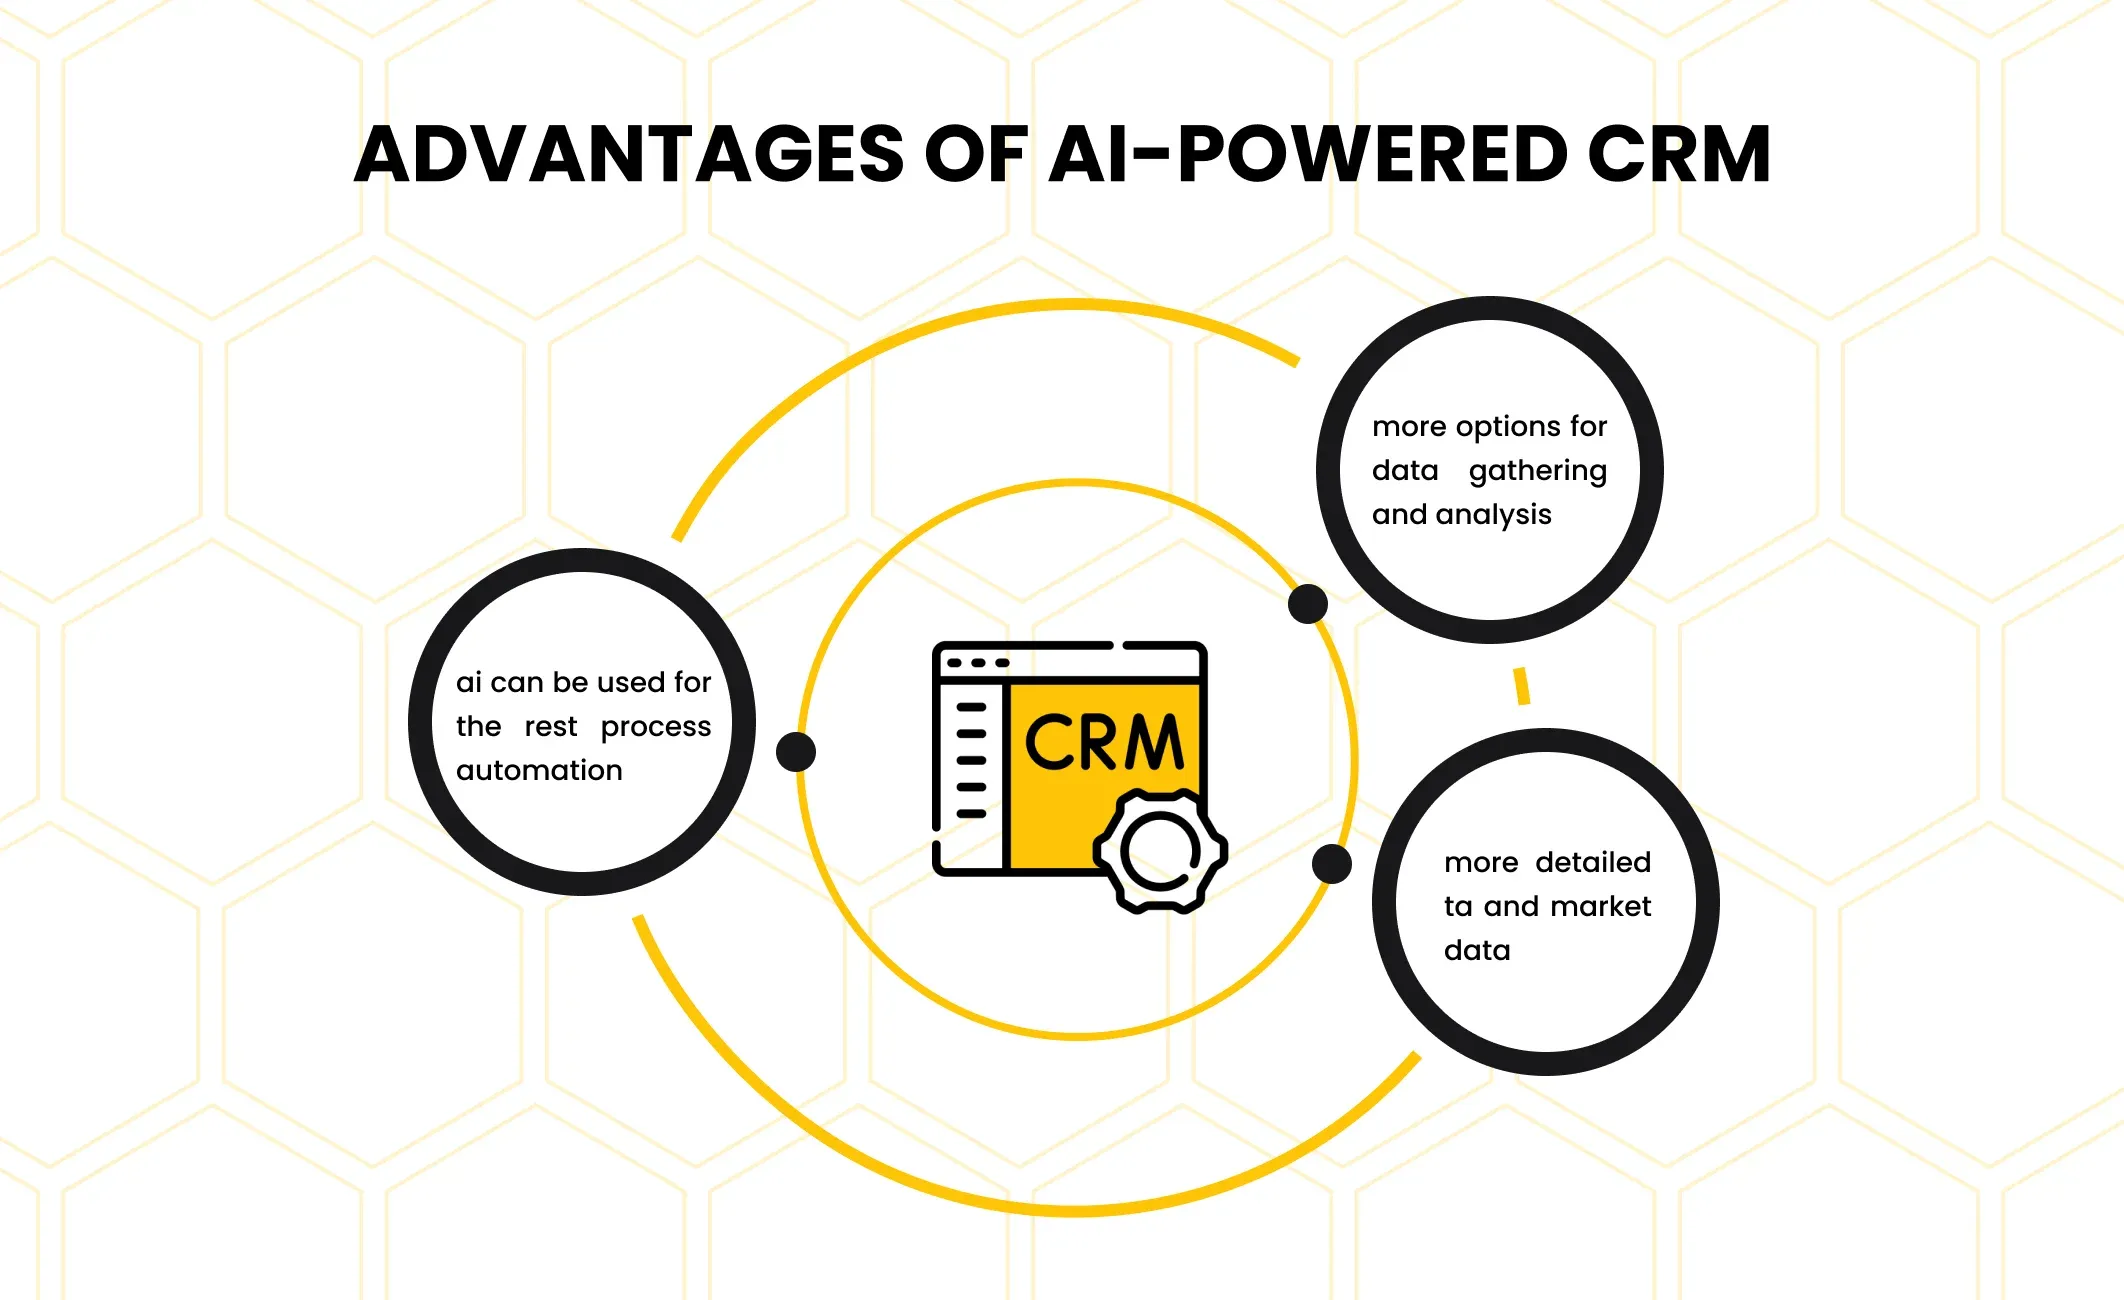 Advantages of AI-powered CRM